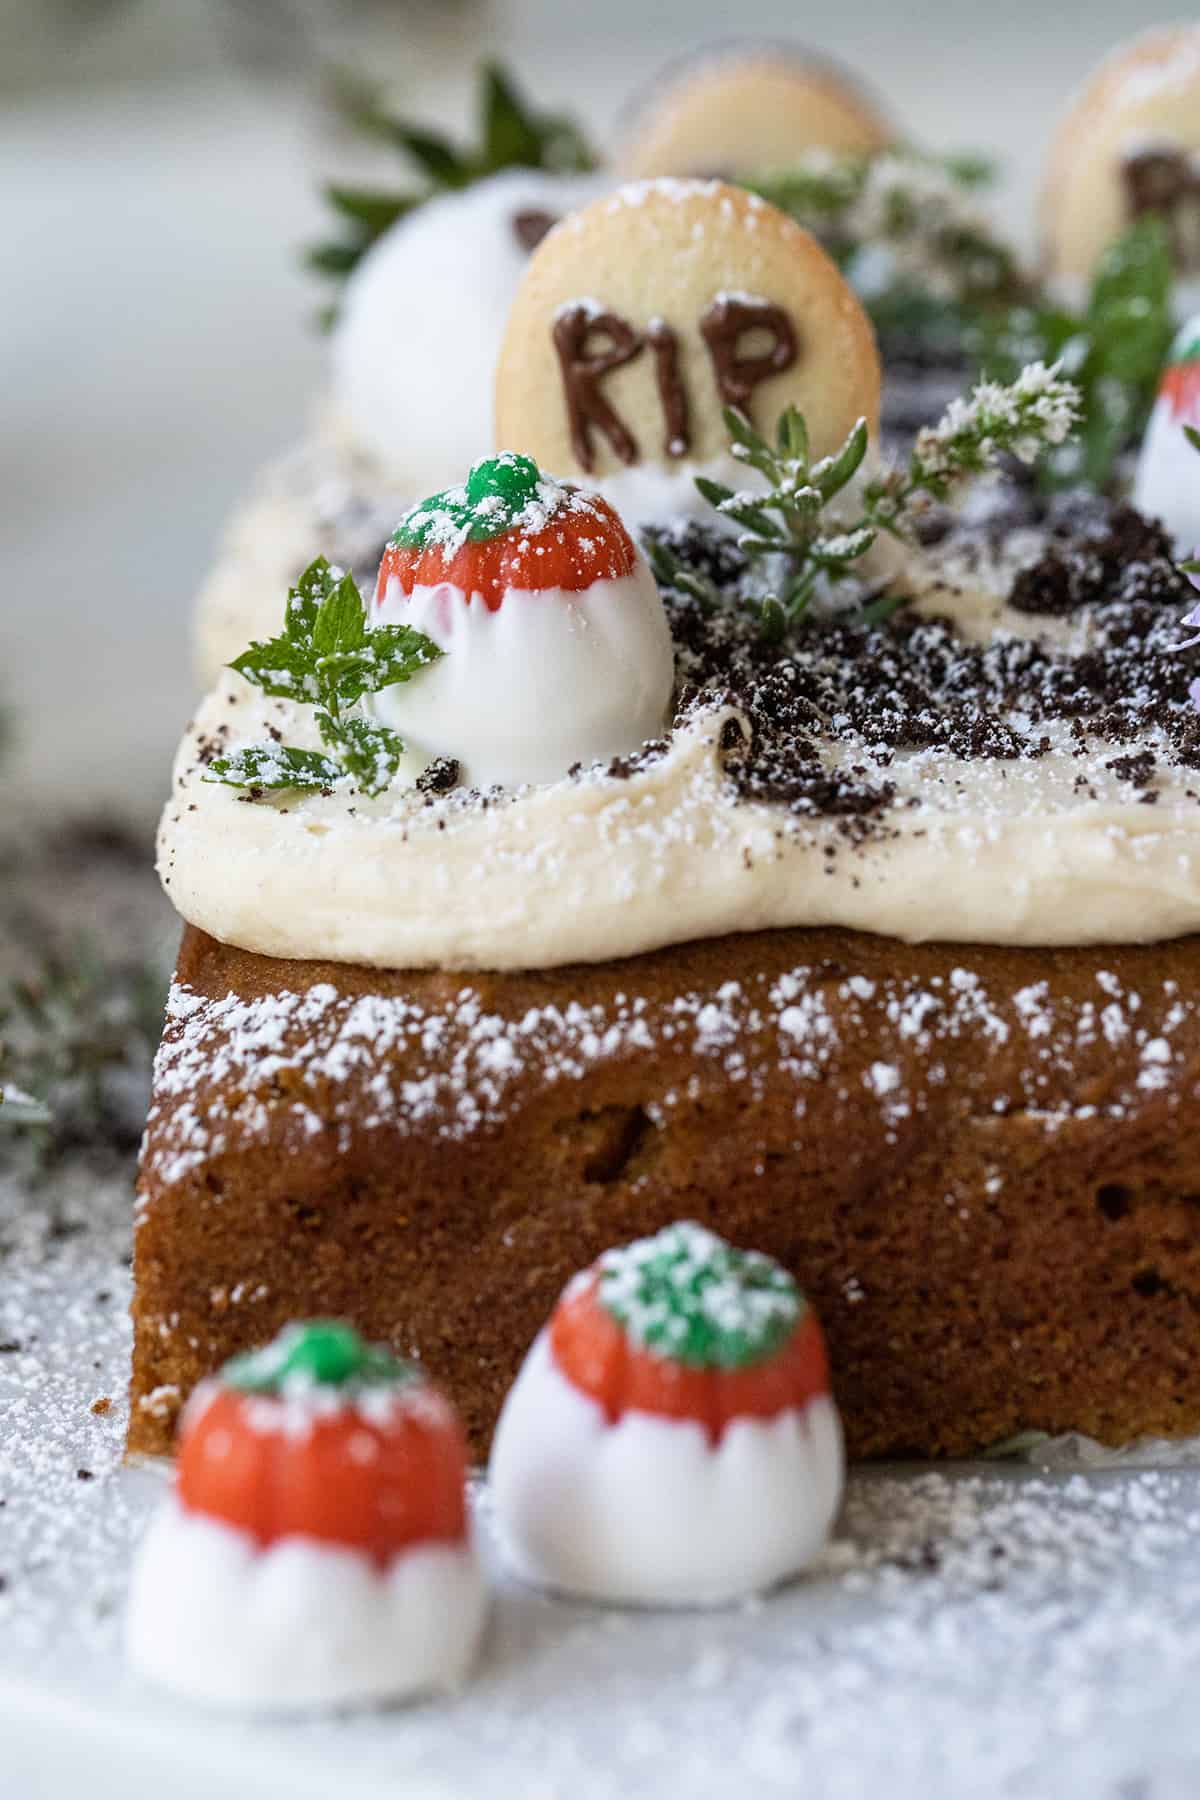 Graveyard cake with chocolate-dipped strawberry ghosts.